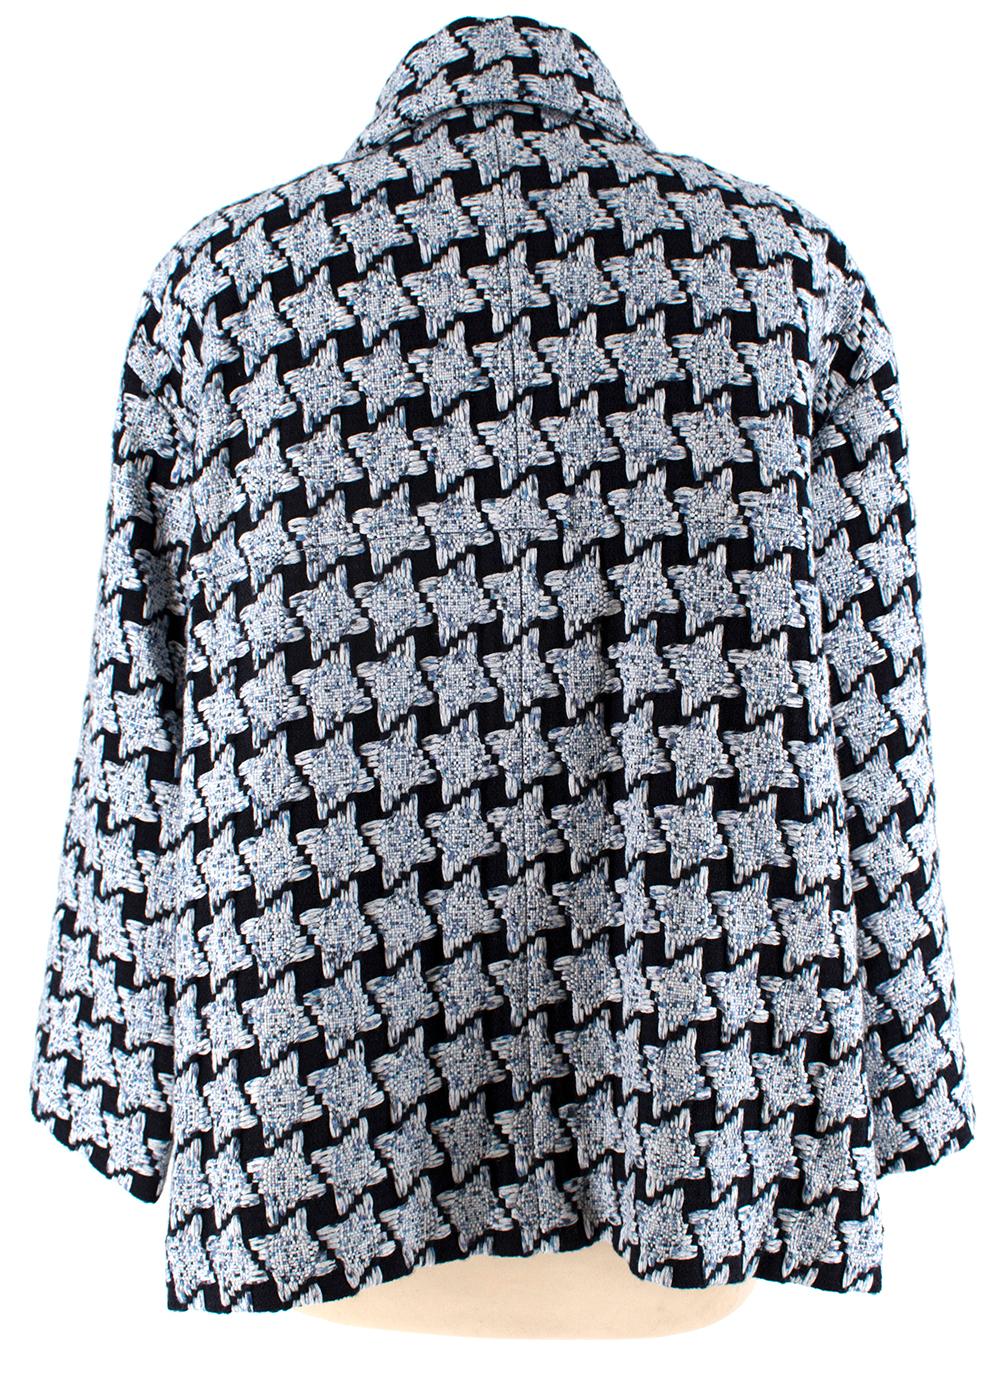 Chanel Baby Blue & Black Oversize Houndstooth Tweed Jacket

- Timeless Design
- Chanel Detailed Buttons
- Beautiful Glass-like Buttons
- Unique Silver Detailed hem
- x4 Outer Pockets 
- Houndstooth Design 
- Gorgeous Tone of Colours
- Original Tags